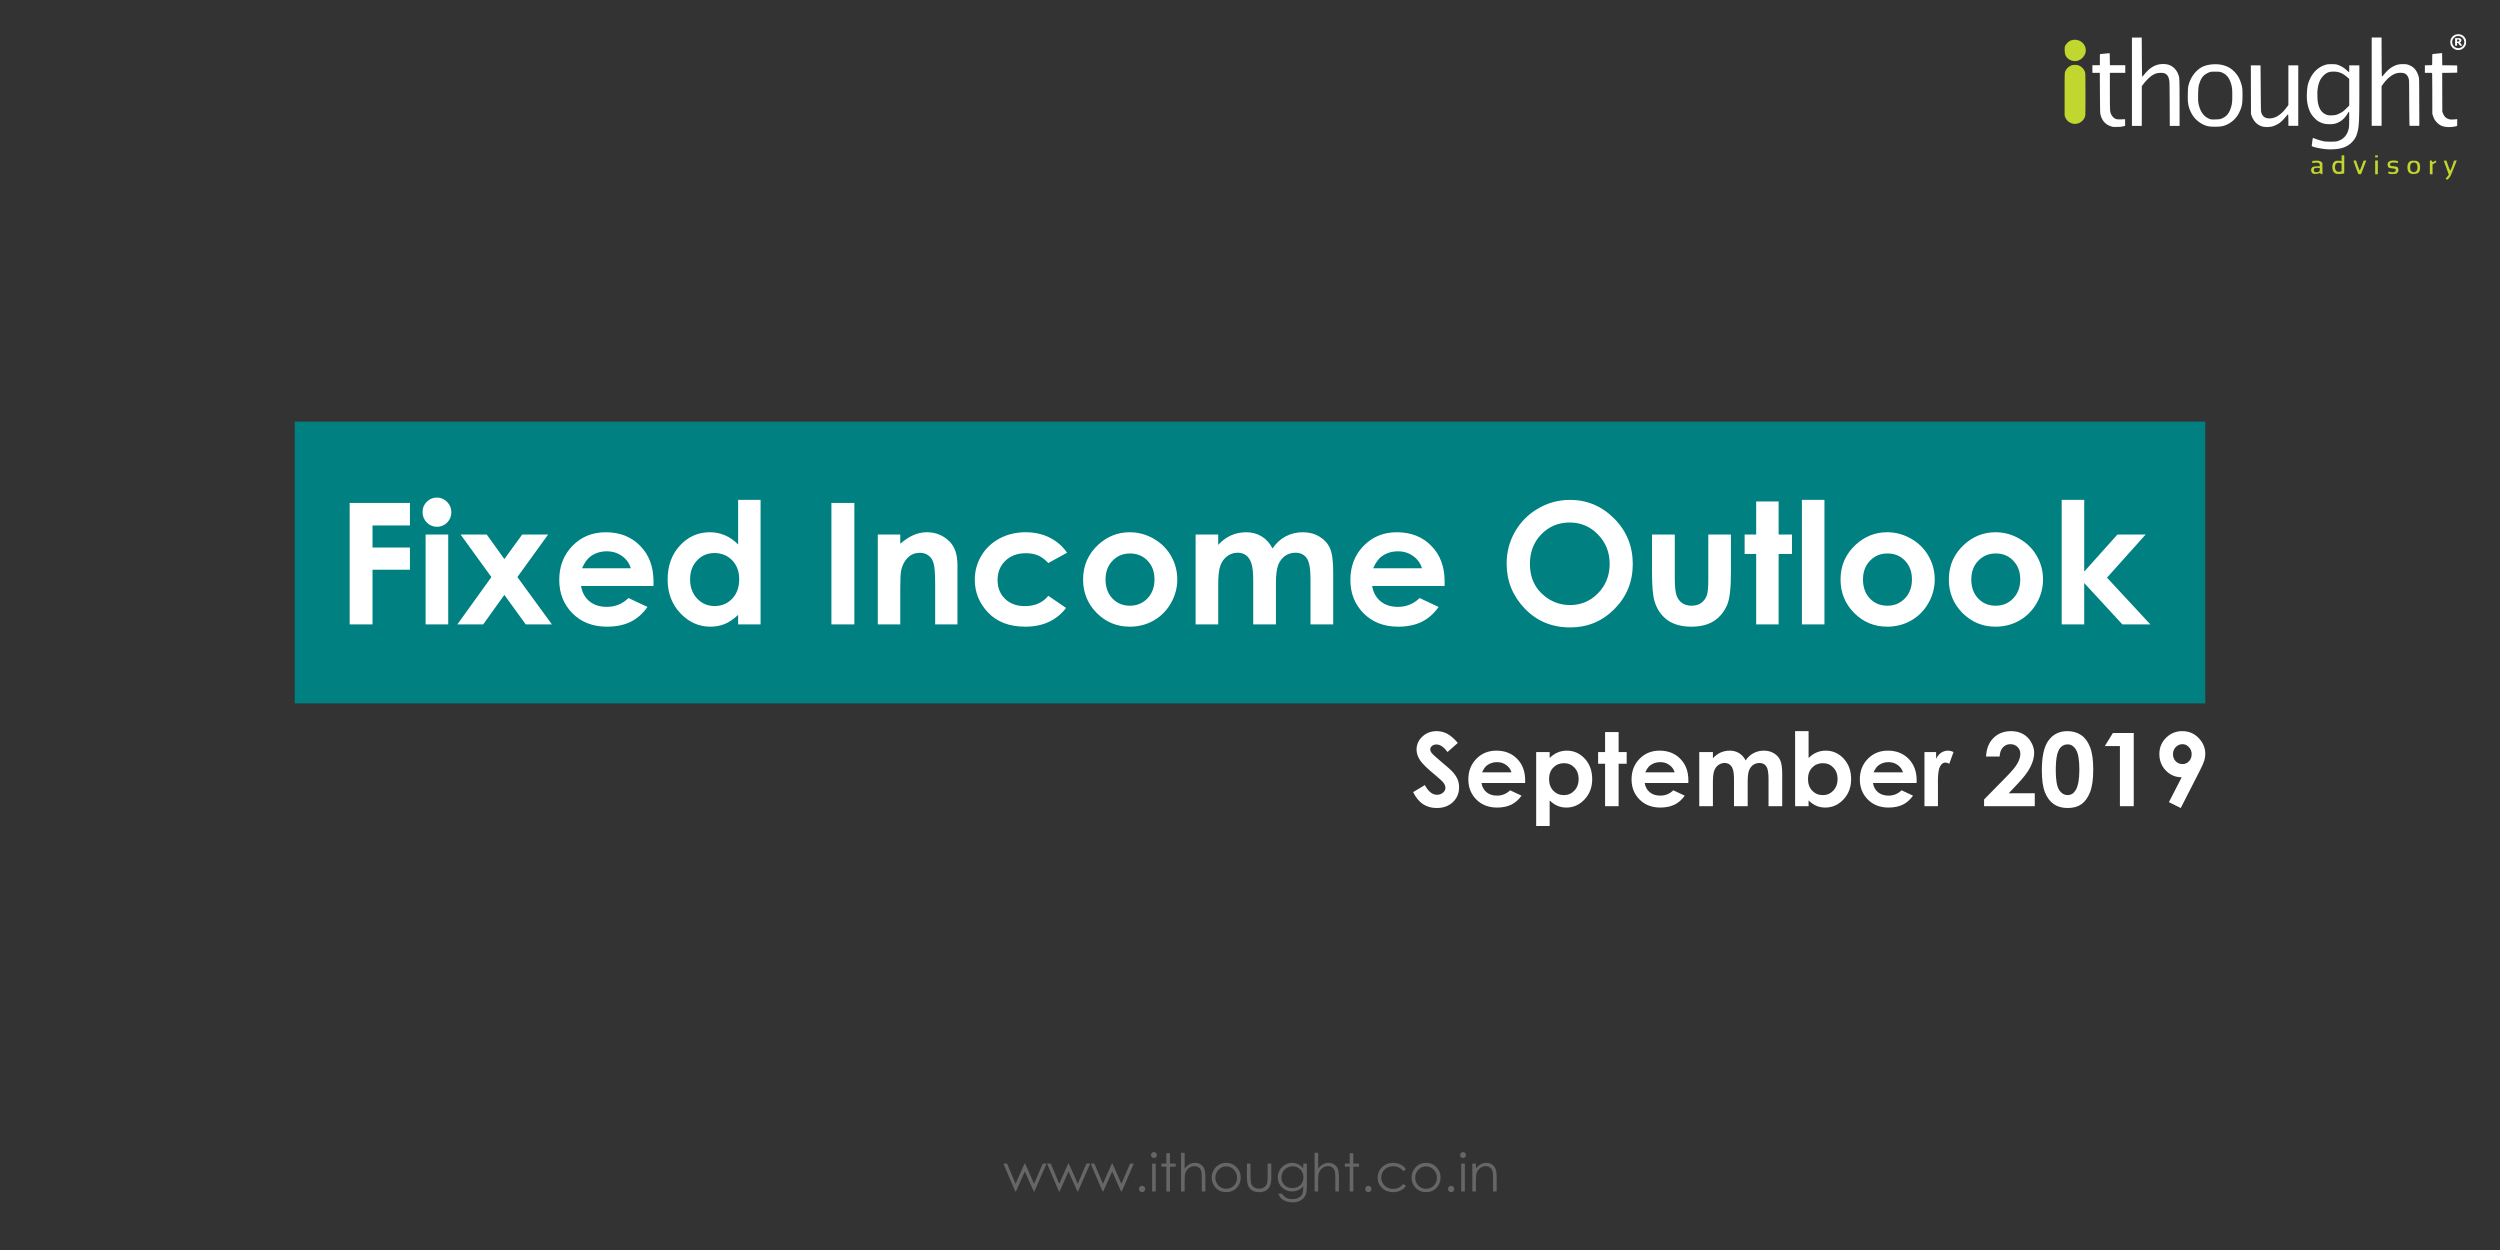 fixed-income-outlook-september-2019-ithought